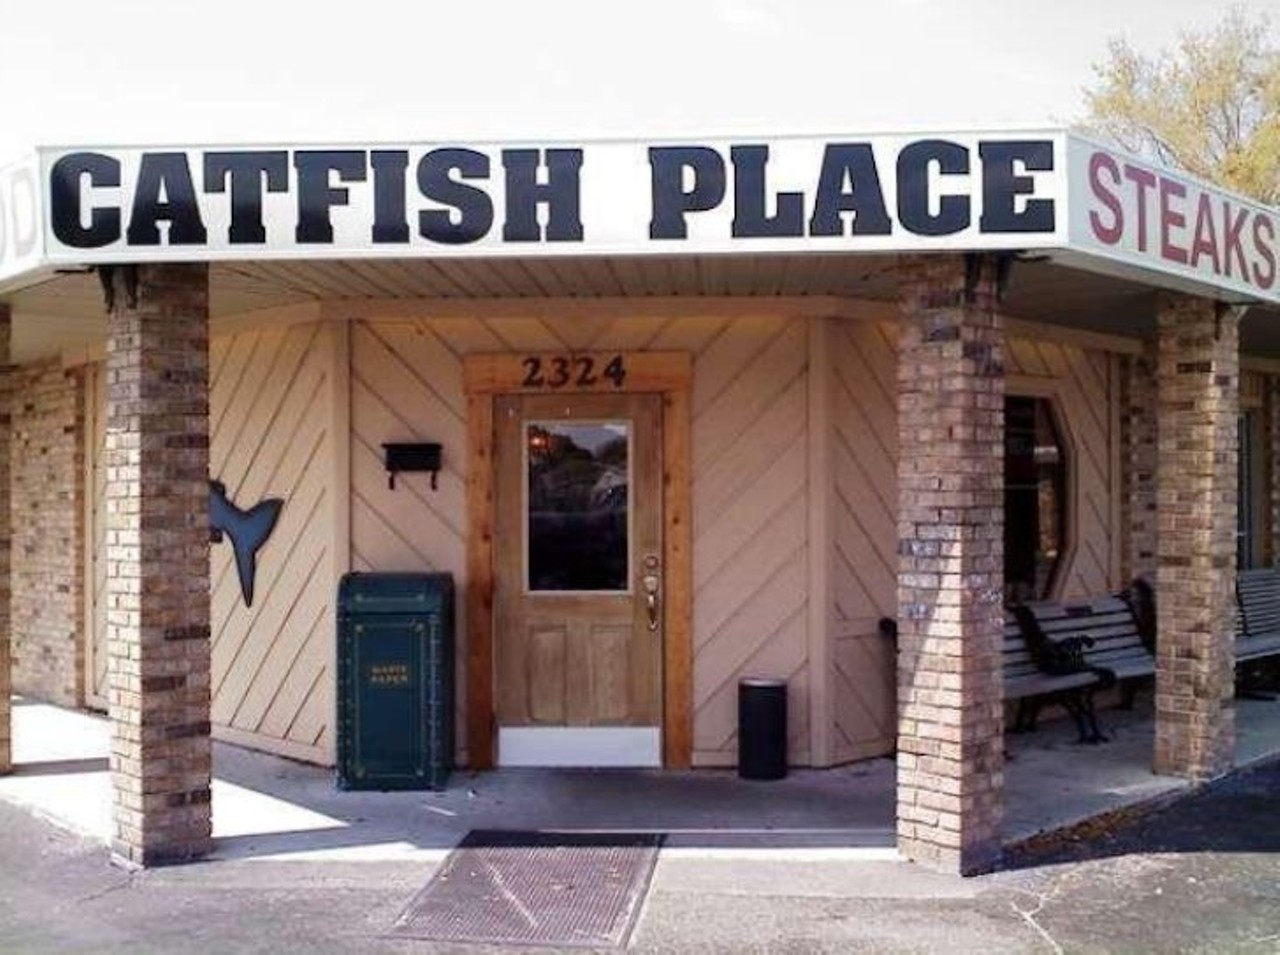 
The Catfish Place of St. Cloud
2324 13th St, St. Cloud; 407-892-5771
This family restaurant has been around since 1973, with its catfish being caught daily in Lake Okeechobee. The food and atmosphere fuse classic seafood with southern comfort.
Photo via THE CATFISH PLACE OF ST. CLOUD/Facebook